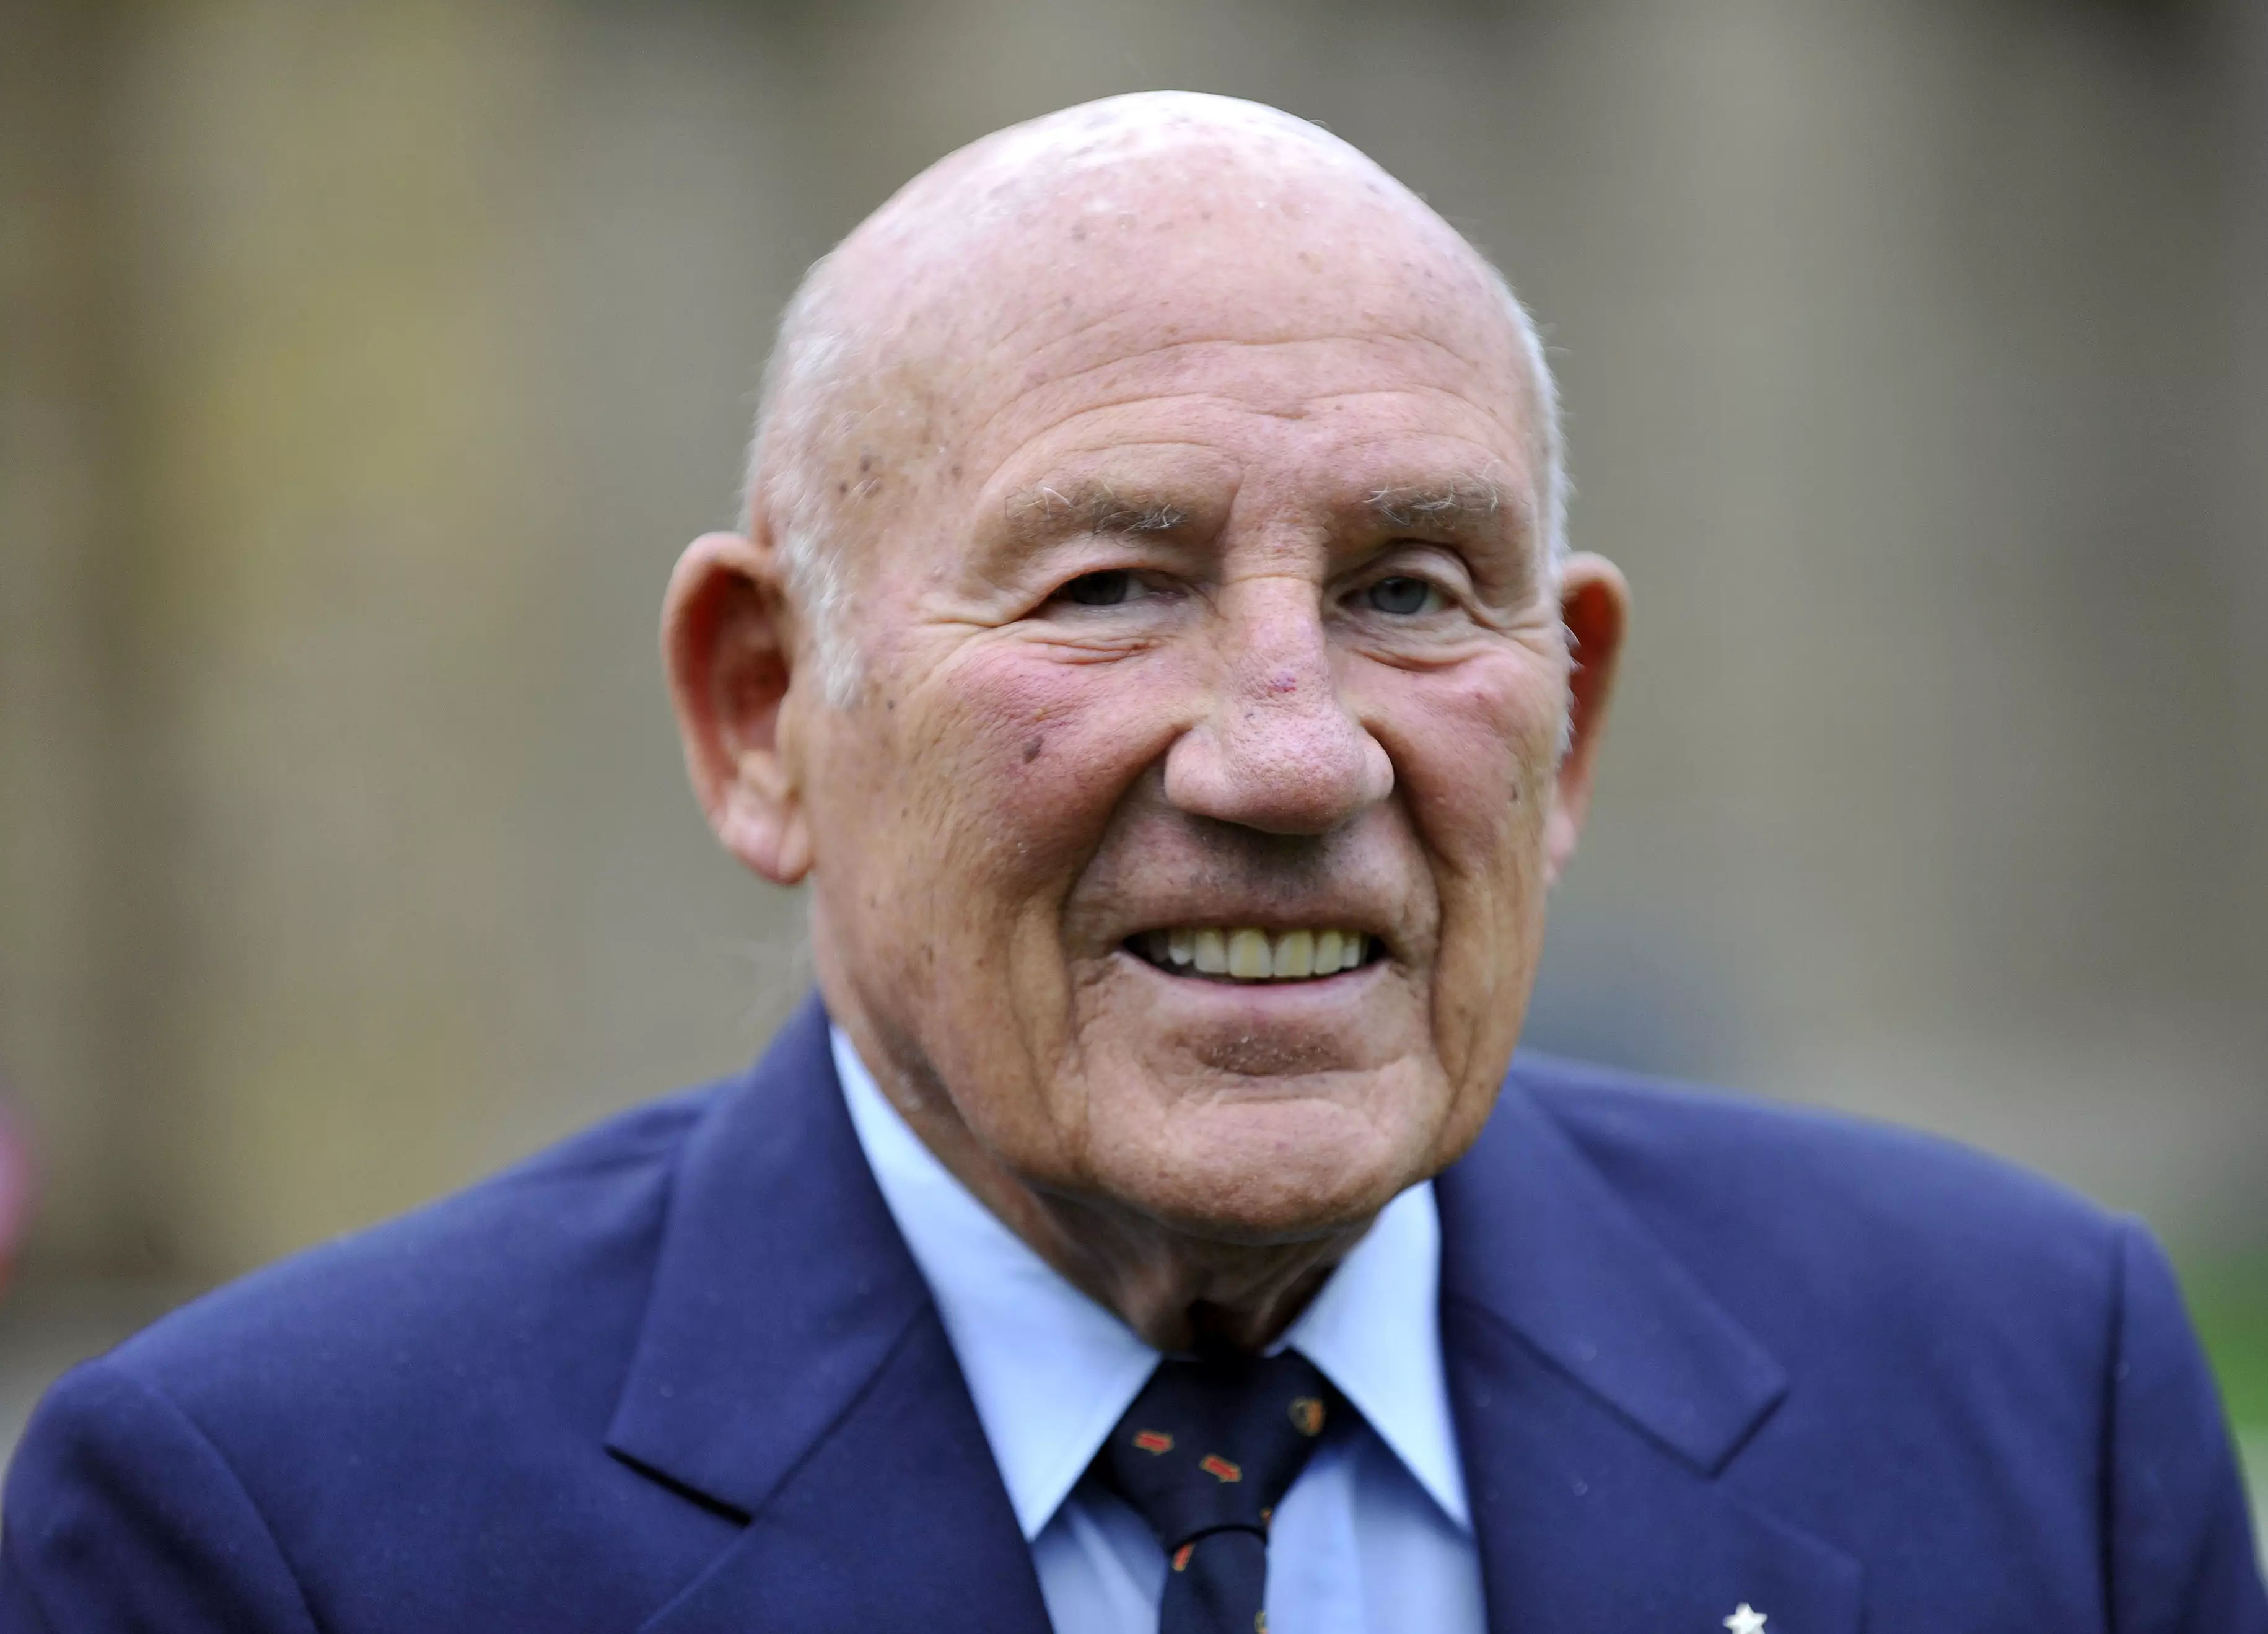 Sir Stirling Moss has sadly died aged 90.